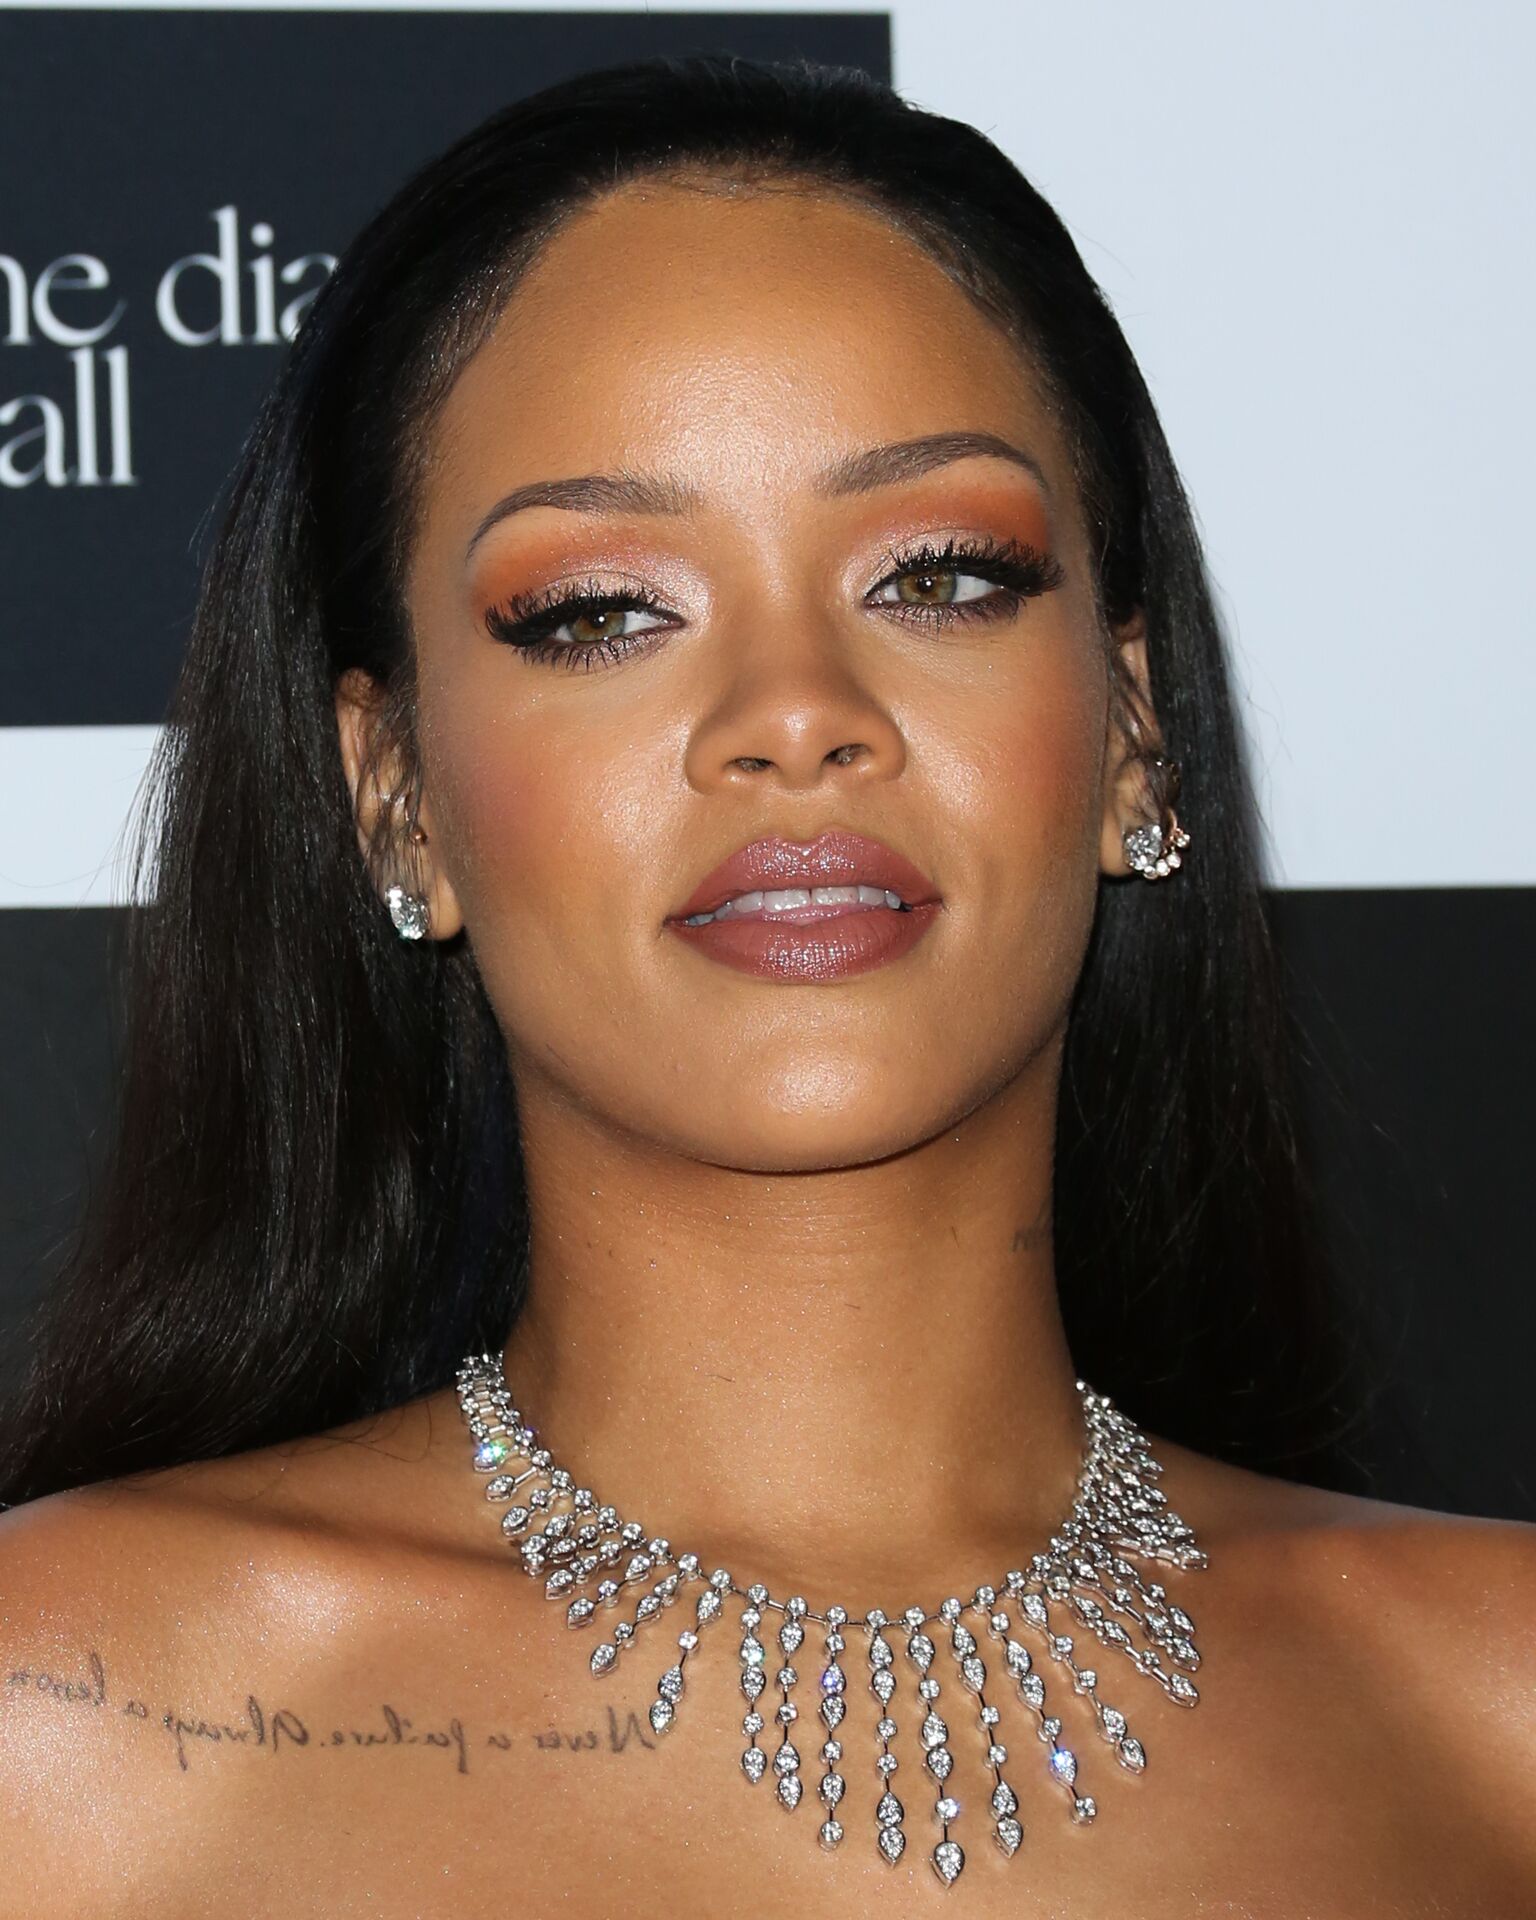 Rihanna arrived on the red carpet at the 2nd Diamond Ball on December 10, 2015, in Santa Monica, California | Source: Paul Archuleta/Getty Images